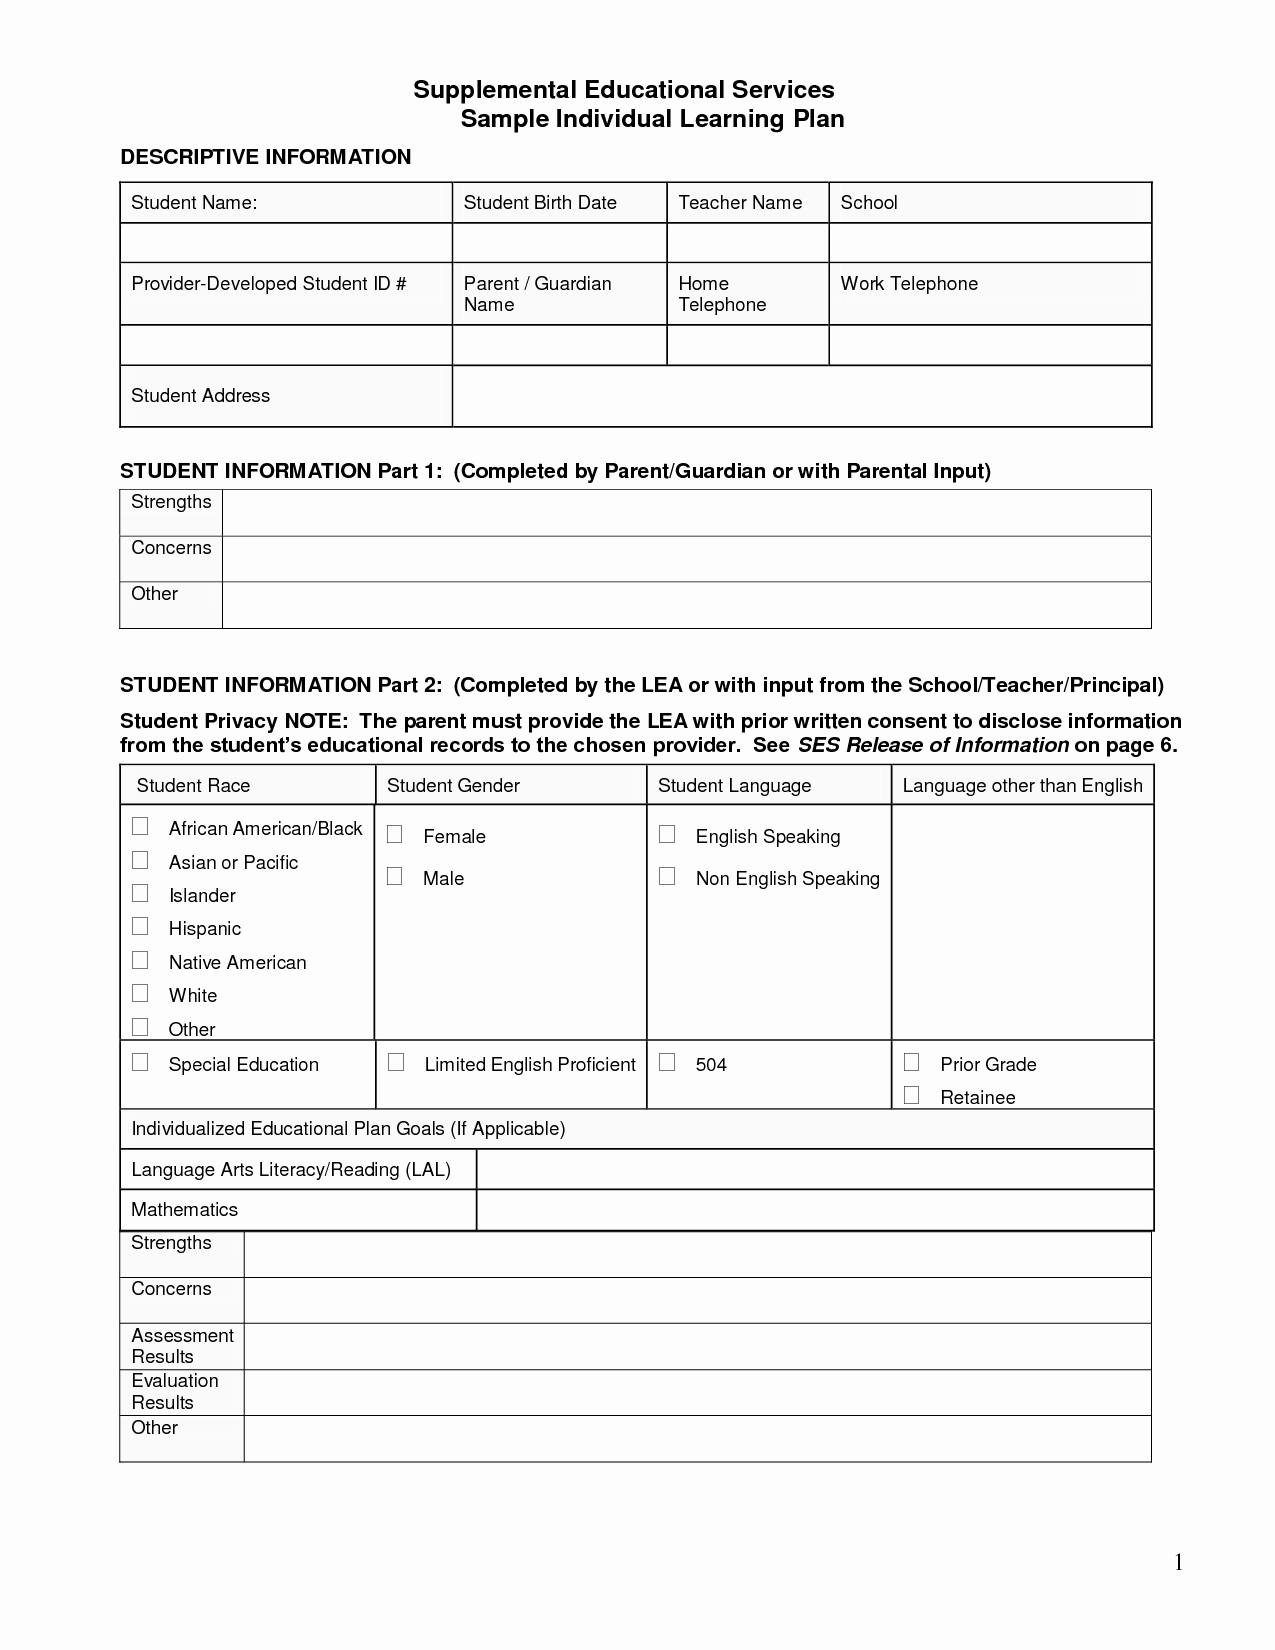 Personalized Learning Plan Template Best Of Image Result for Learning Plan Template